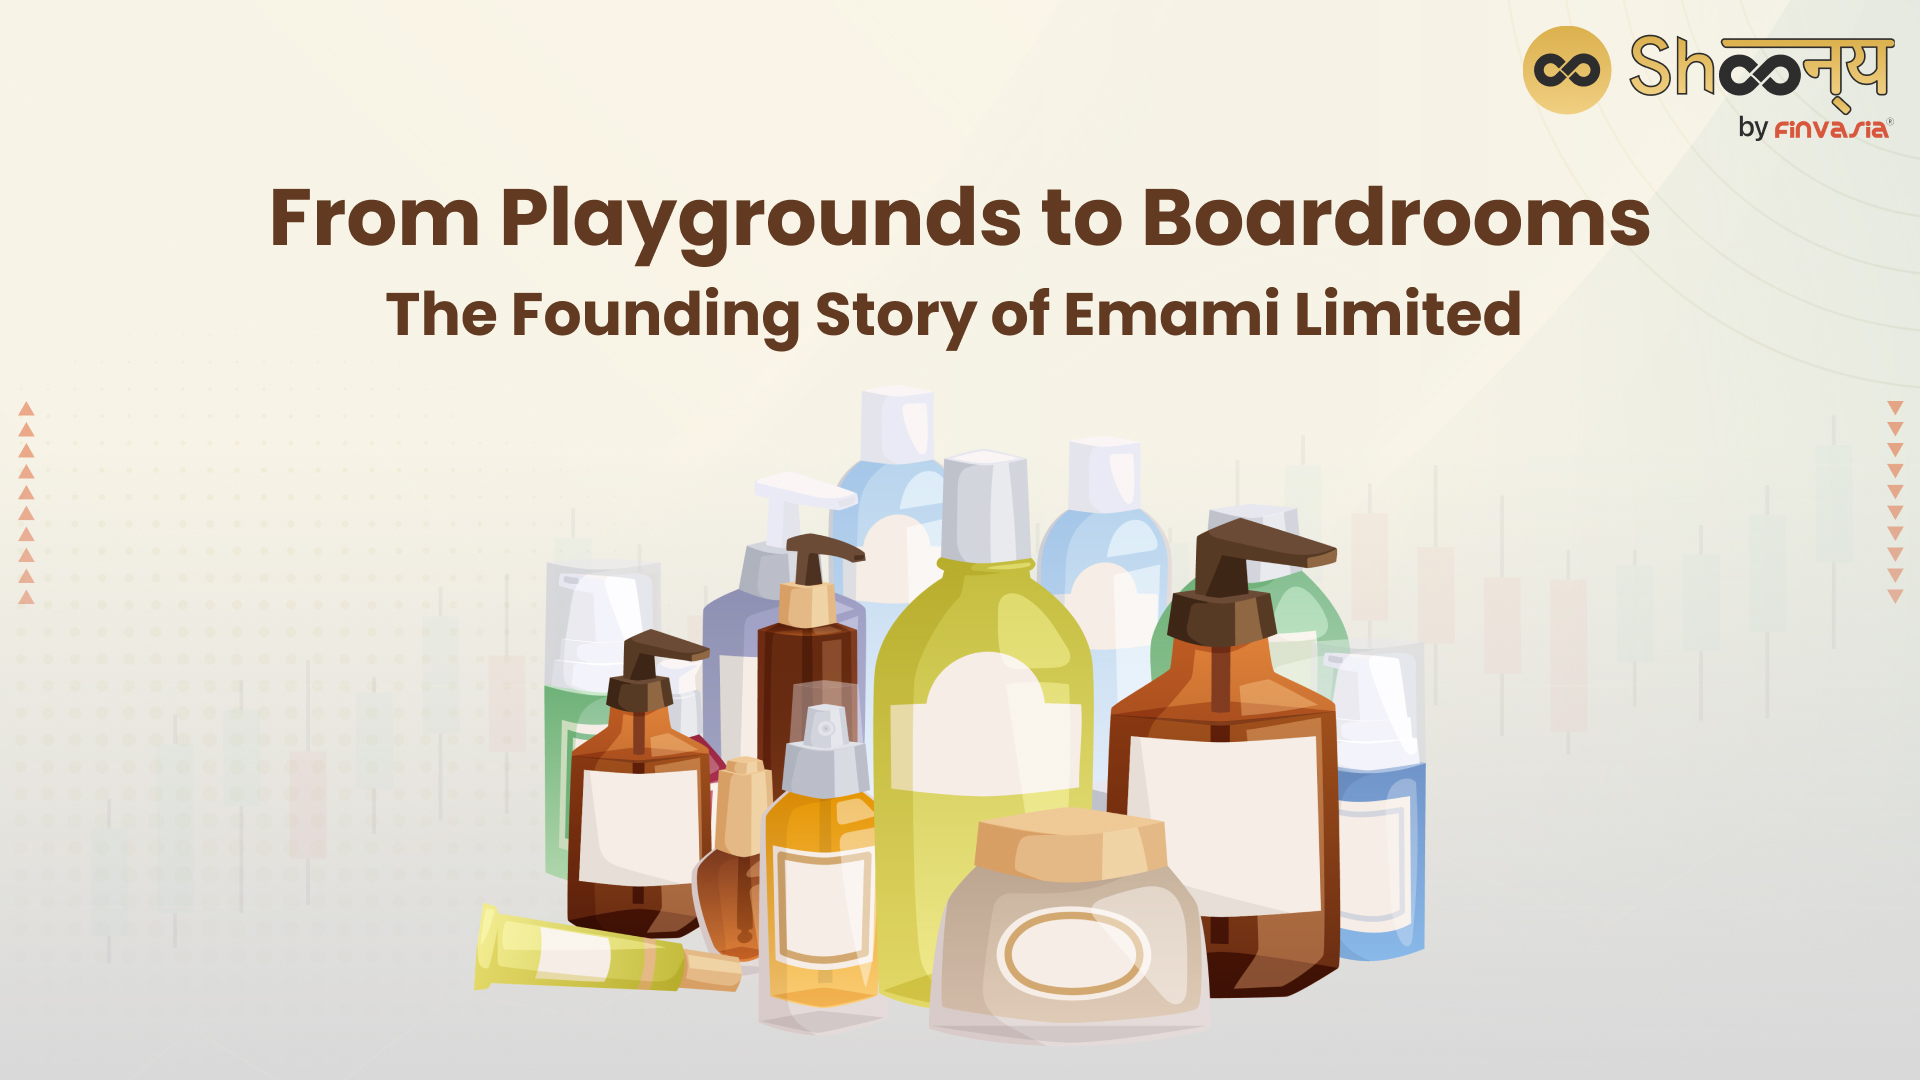 From Playgrounds to Boardrooms